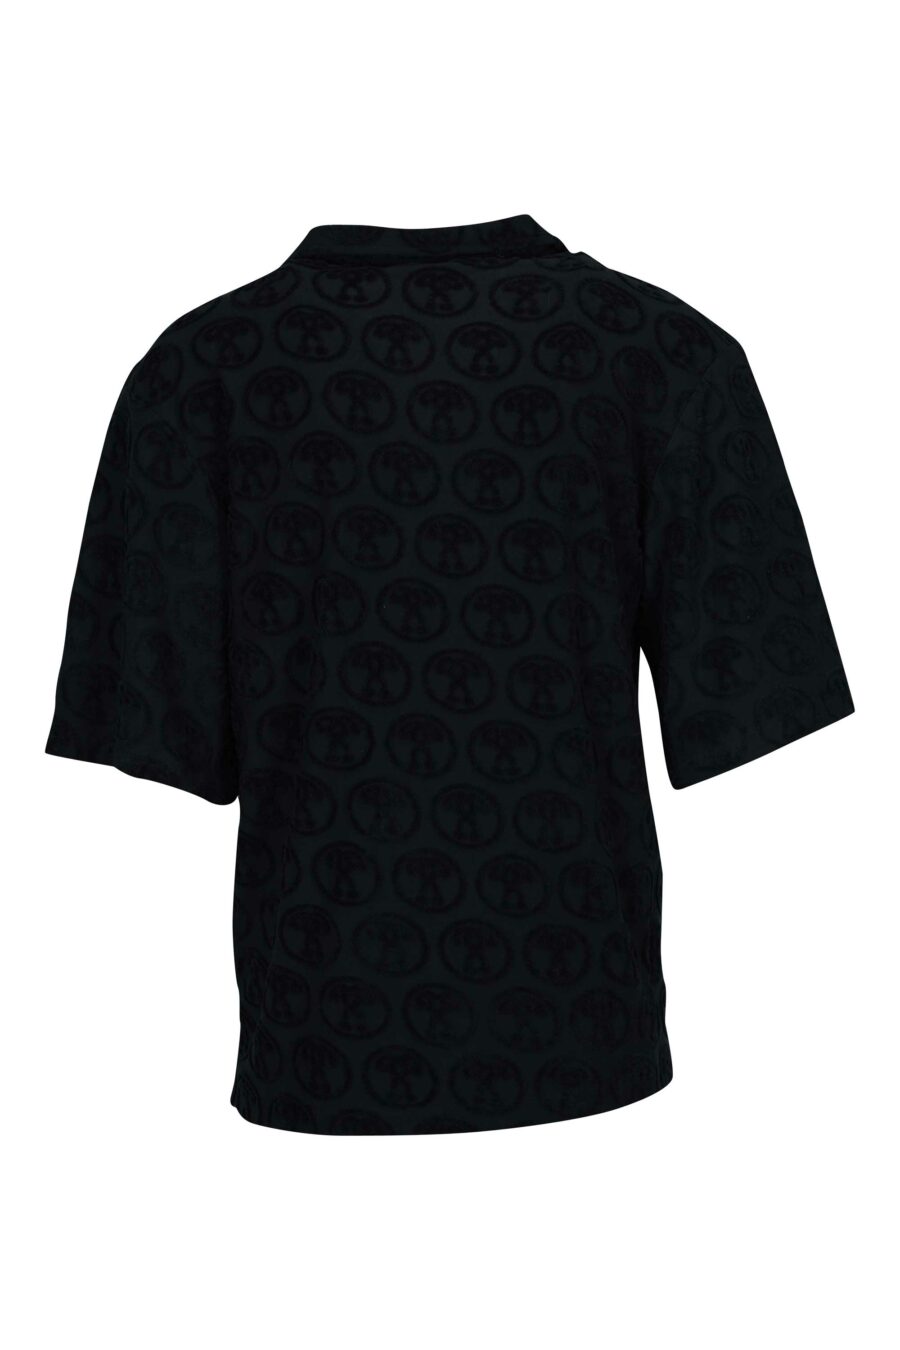 Black short sleeve shirt with "all over logo" double question - 667113670744 1